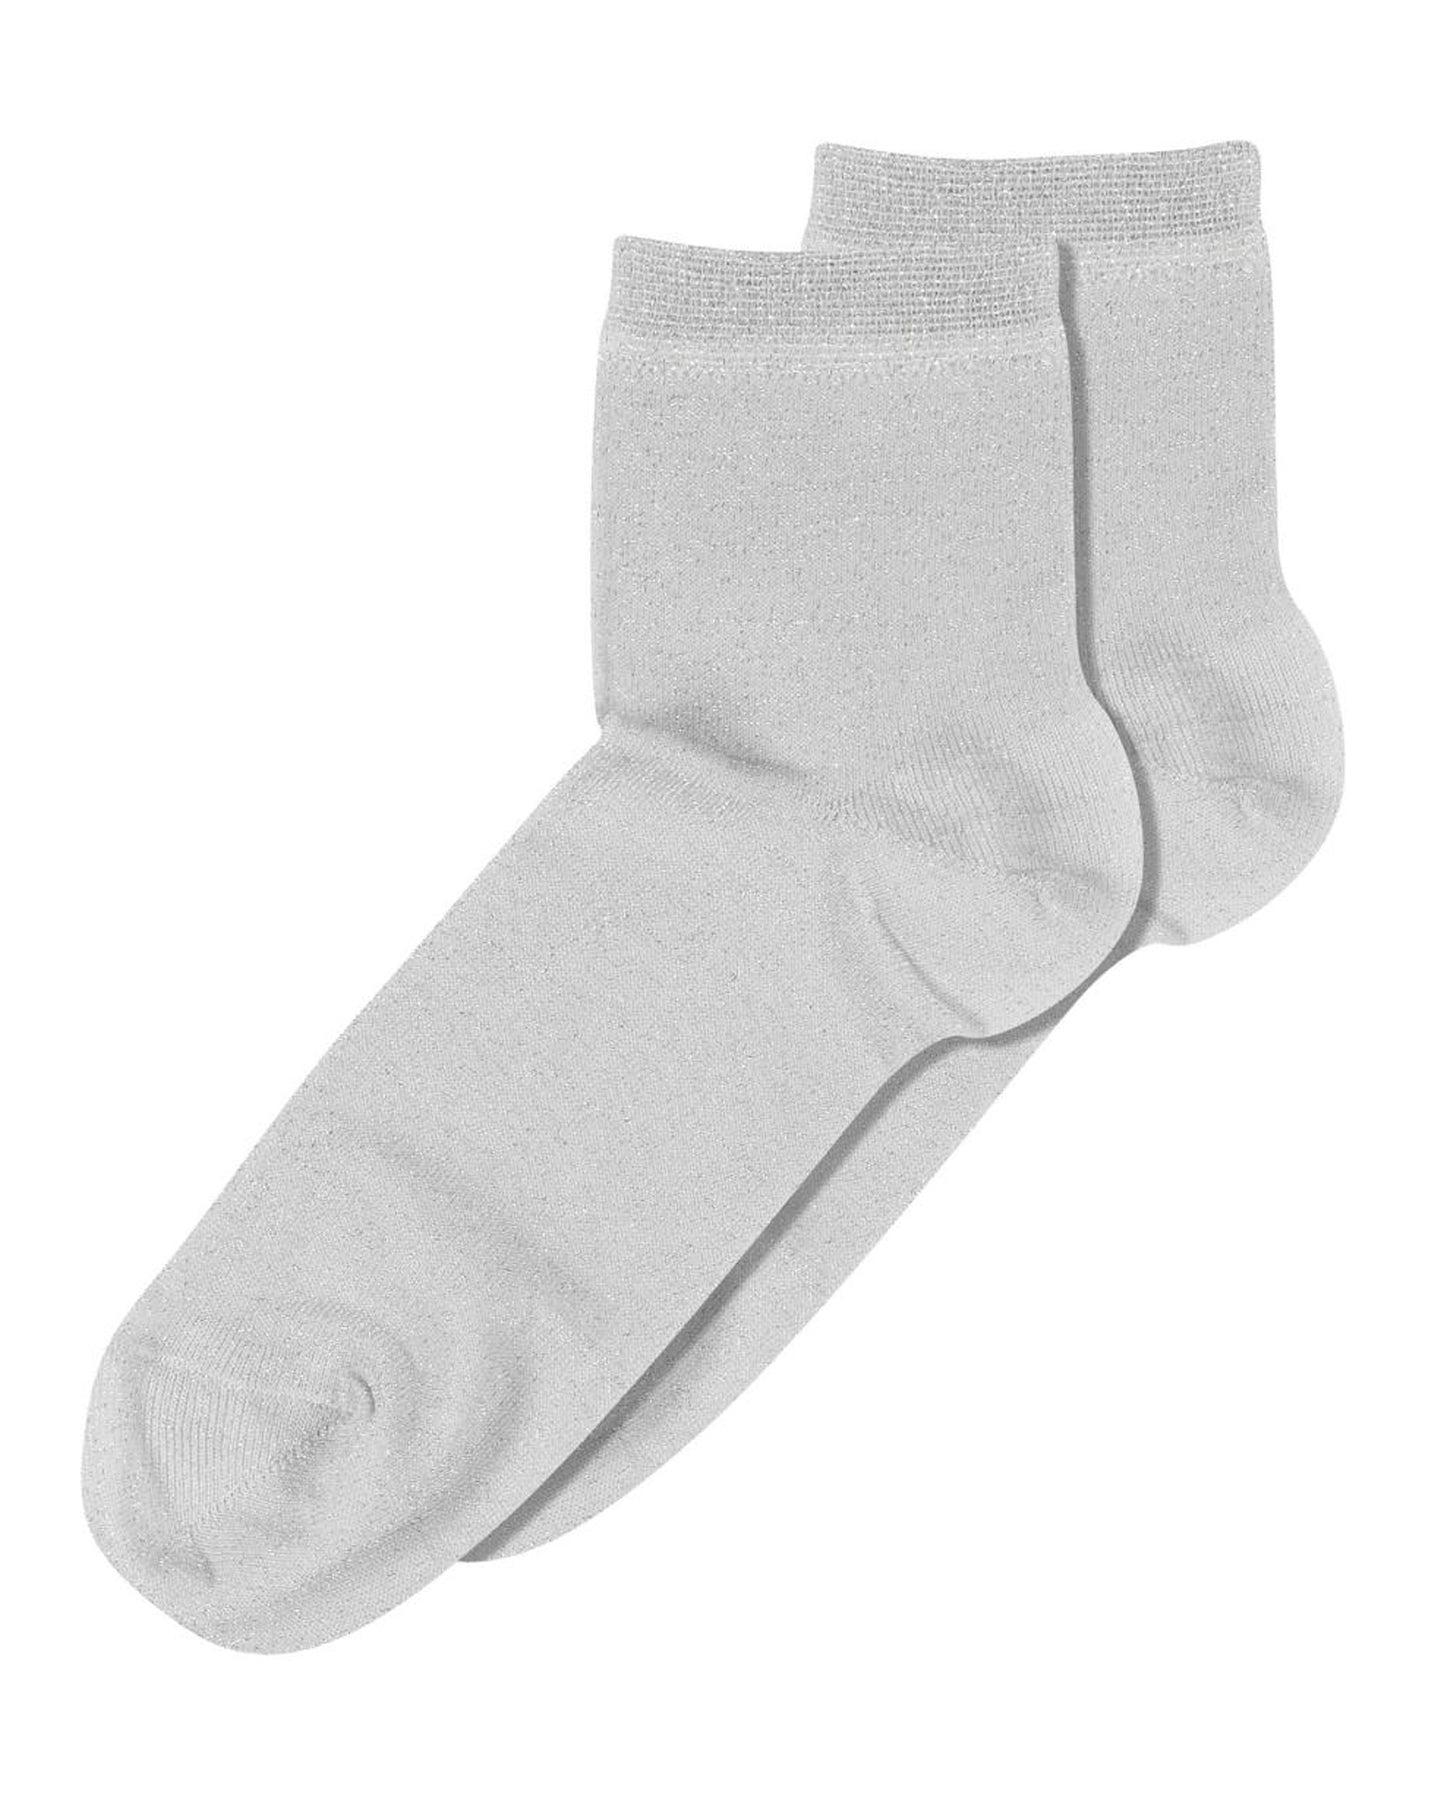 MP Denmark 77665 Pi Socks - Light silver grey quarter high fashion ankle socks with sparkly lame through out, plain cuff, shaped heel and flat toe seam.